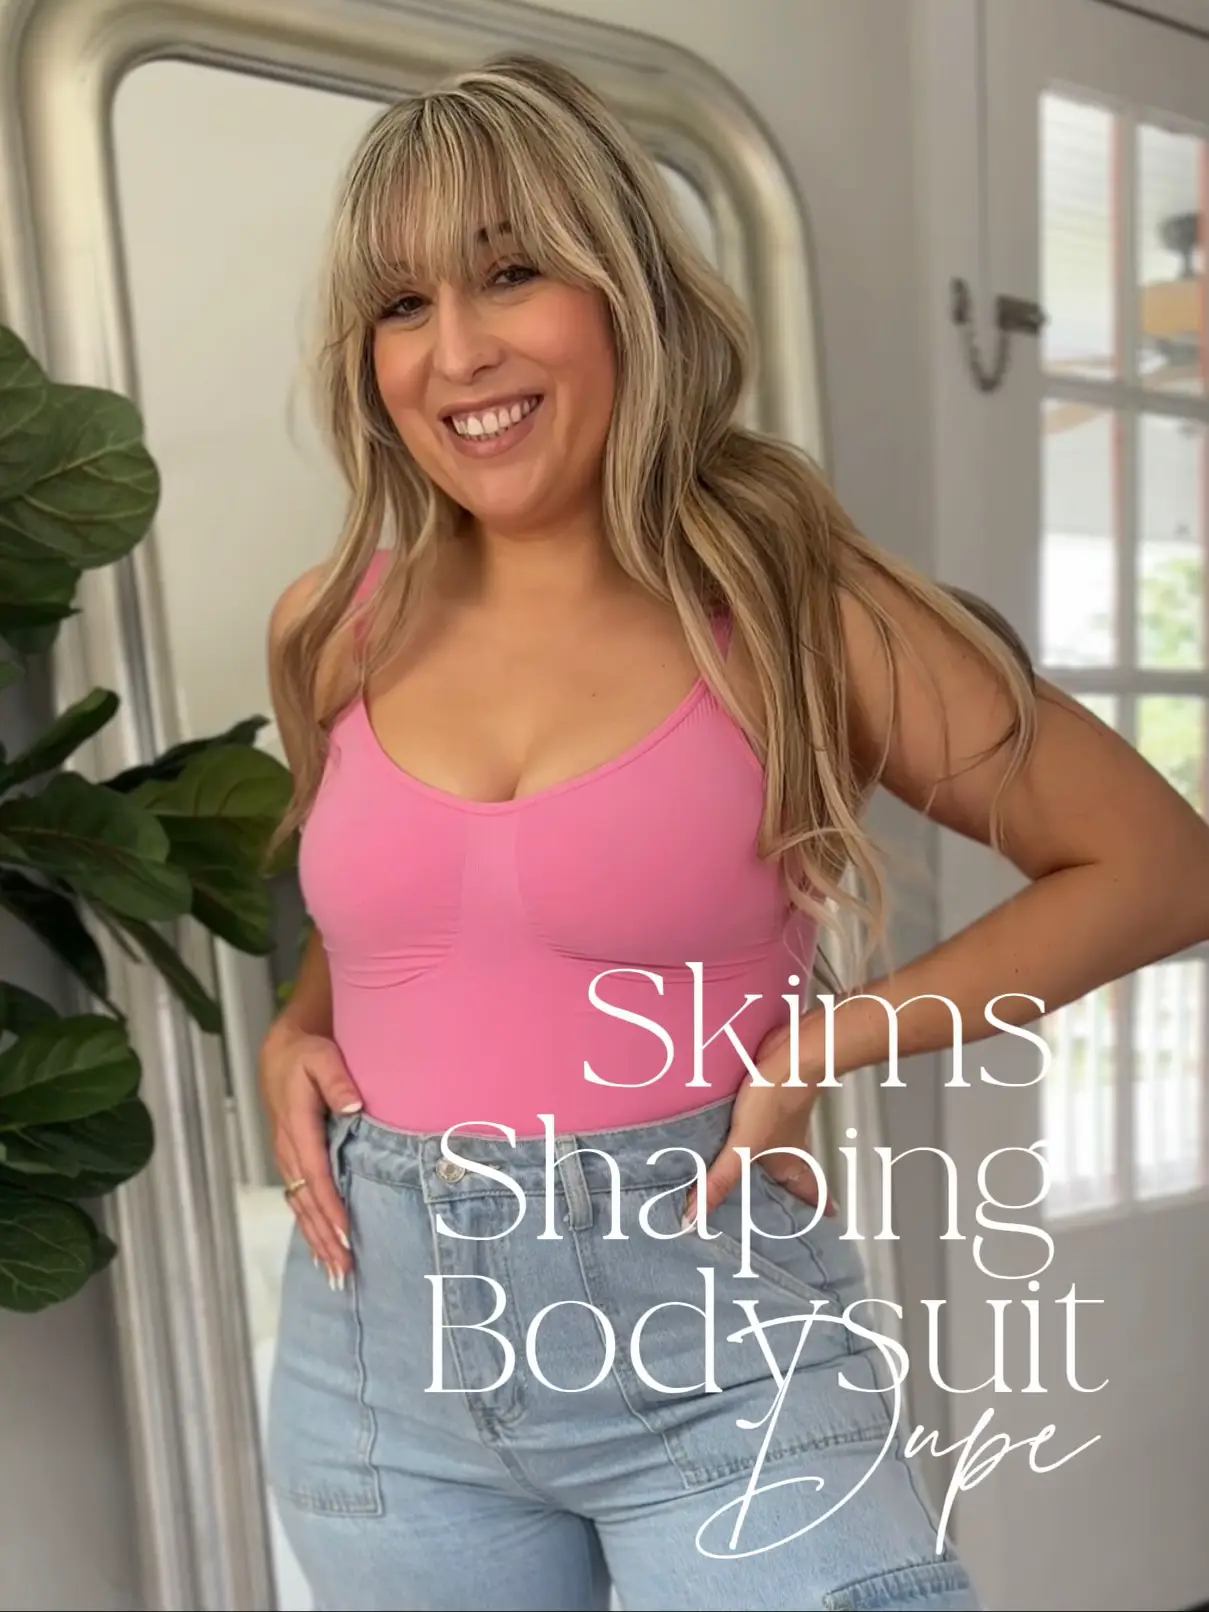 Trying on the viral skims bodysuit dupe from